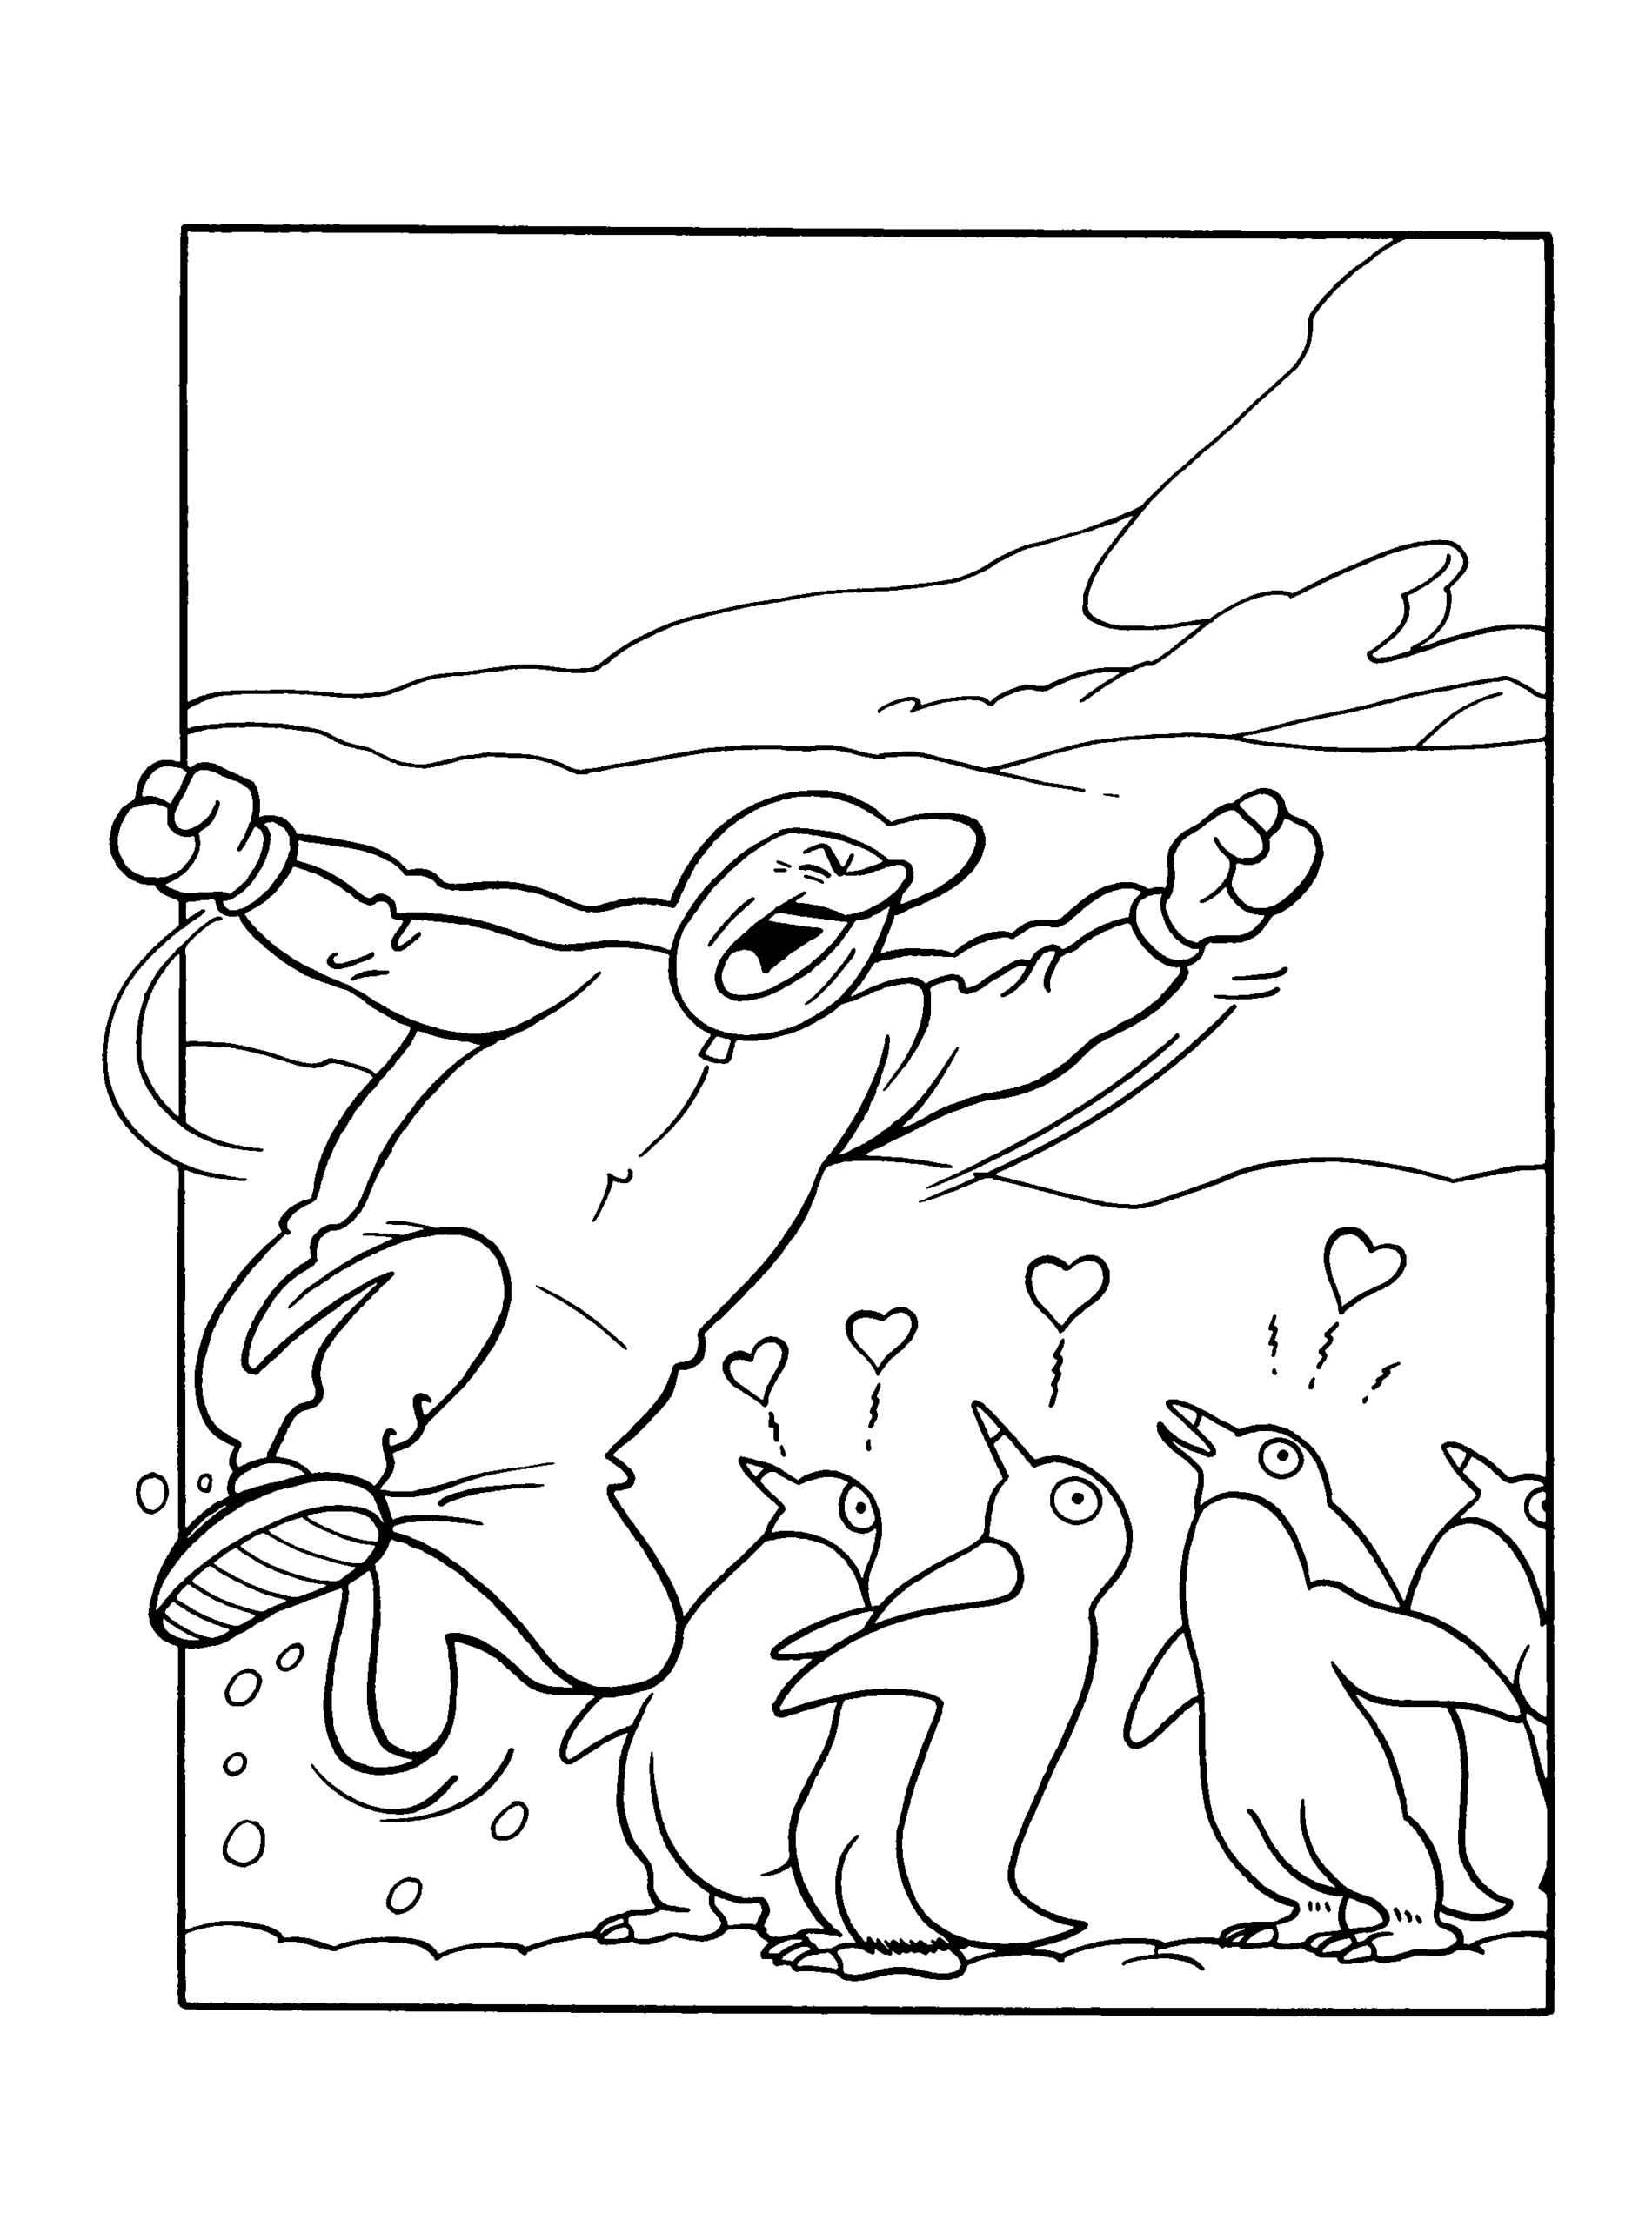 Spike and Suzy Coloring Pages Cartoons spike and suzy 53 Printable 2020 5941 Coloring4free